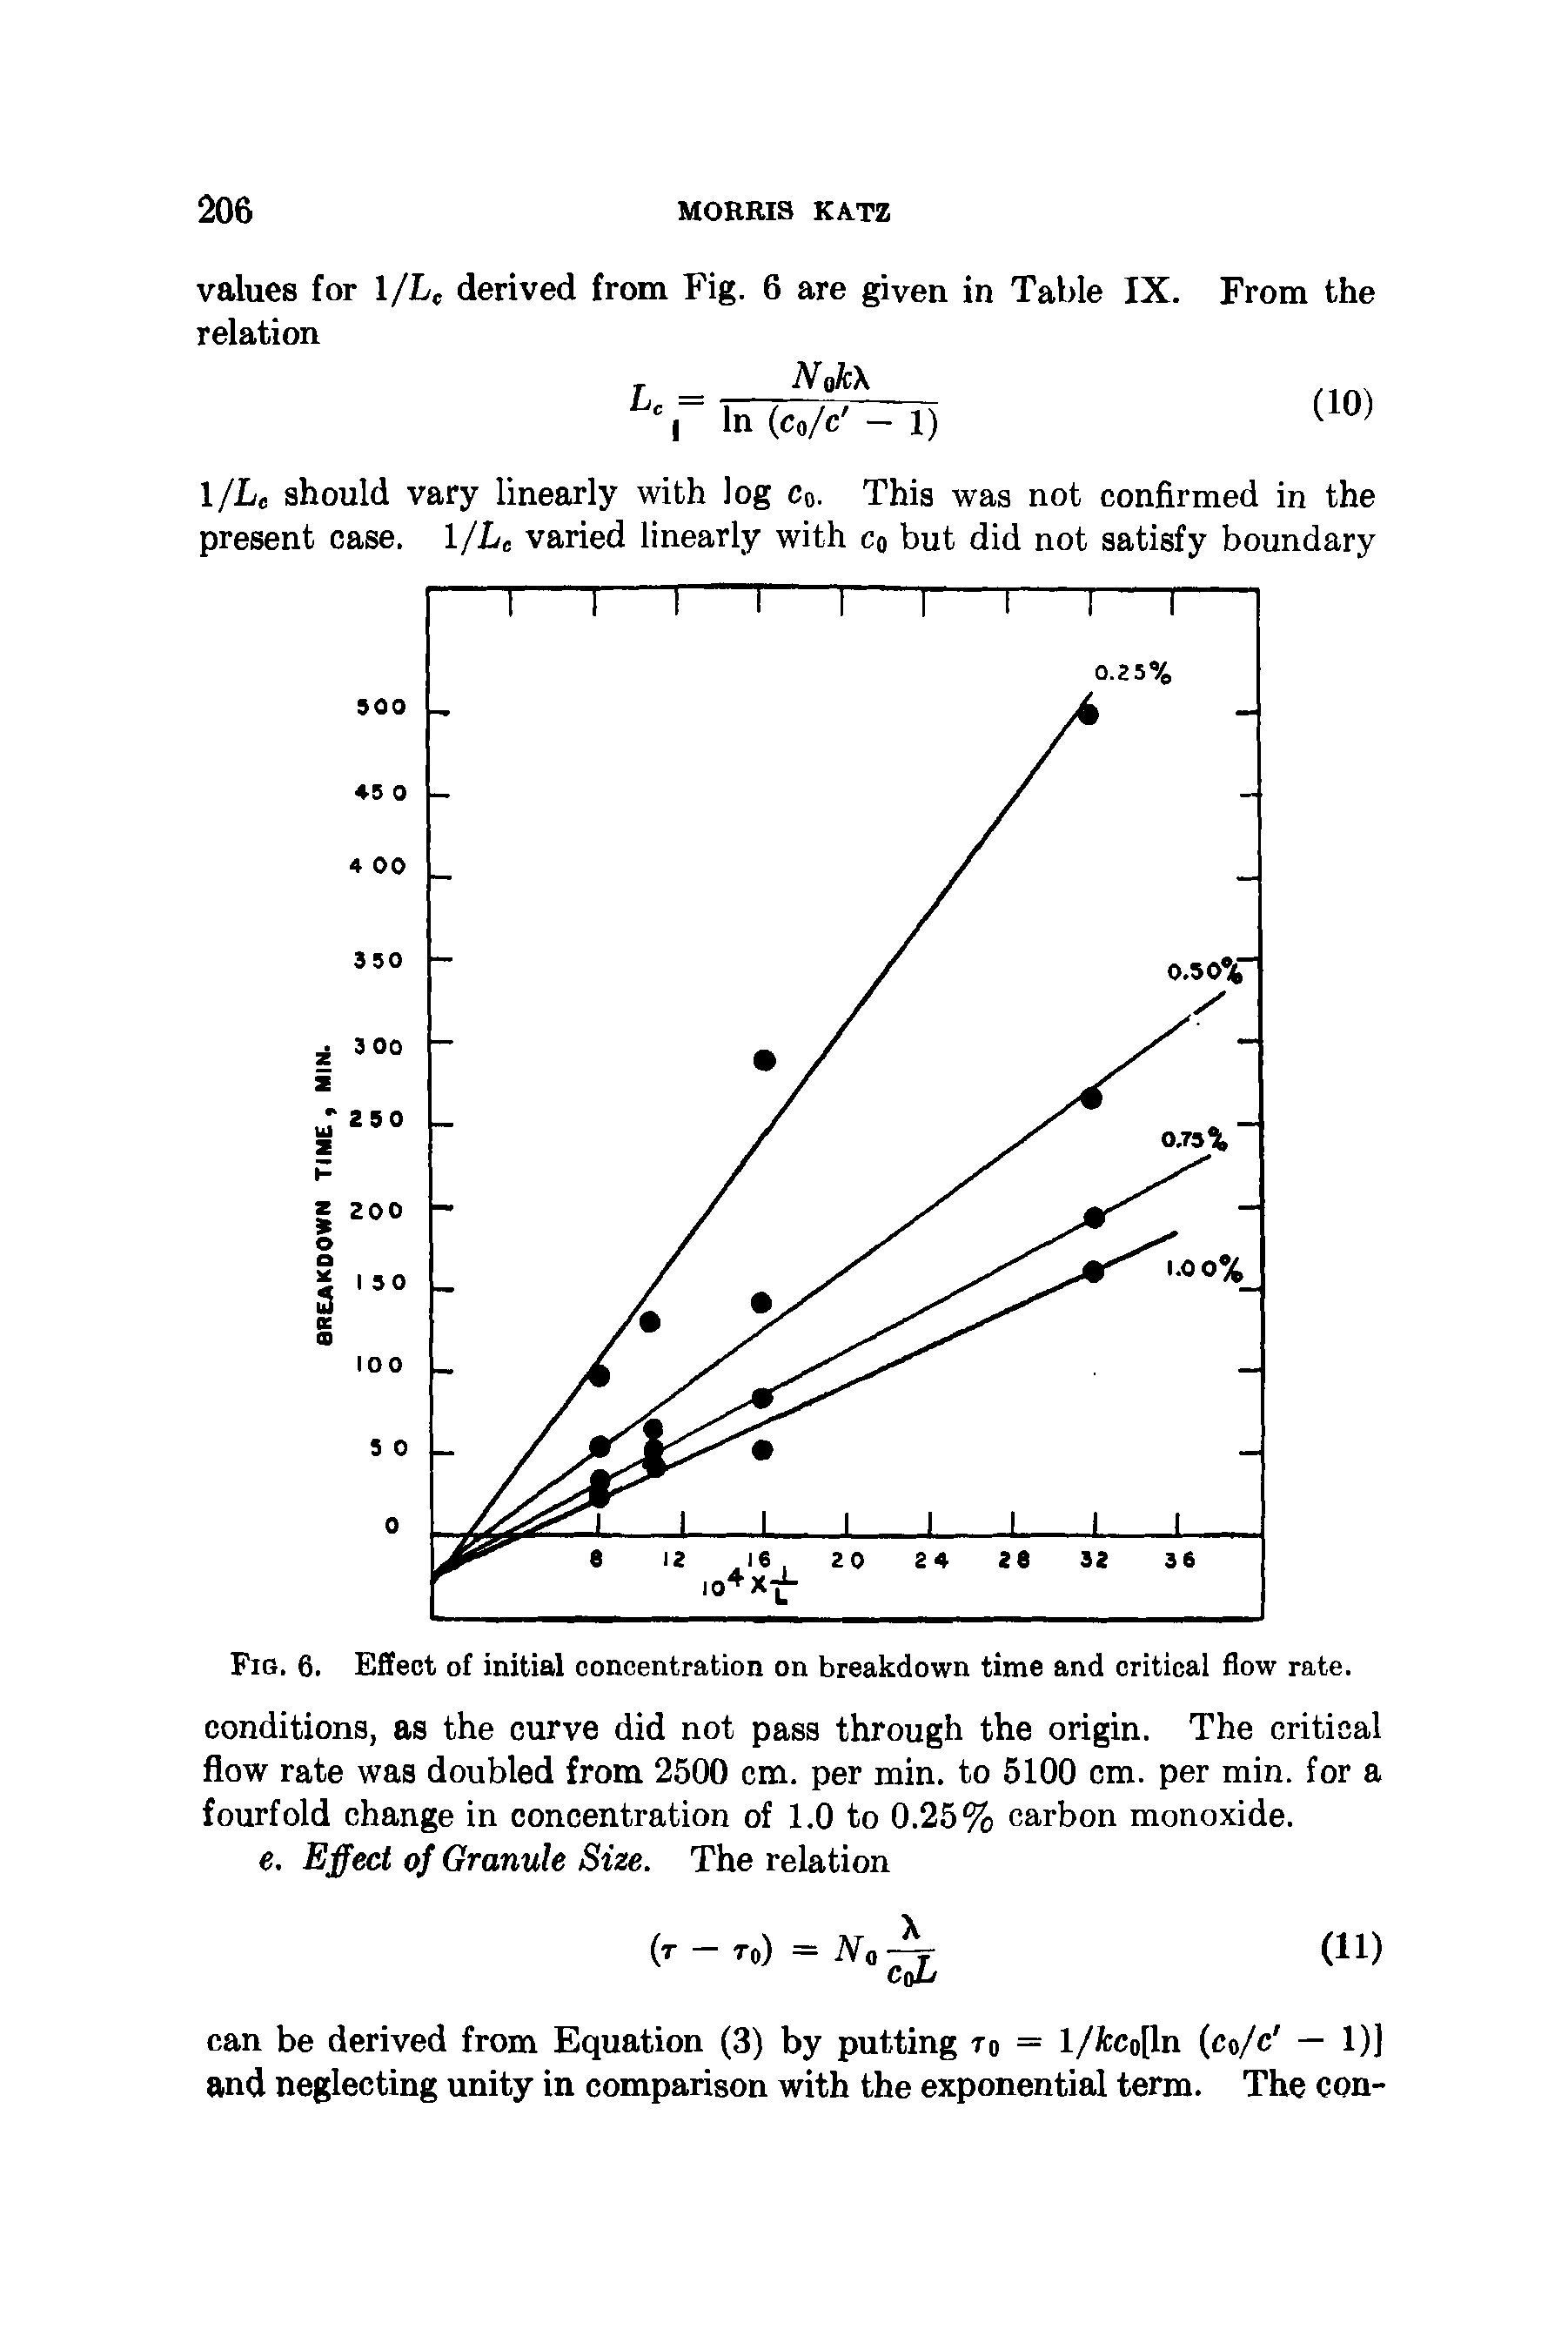 Fig. 6. Effect of initial concentration on breakdown time and critical flow rate.